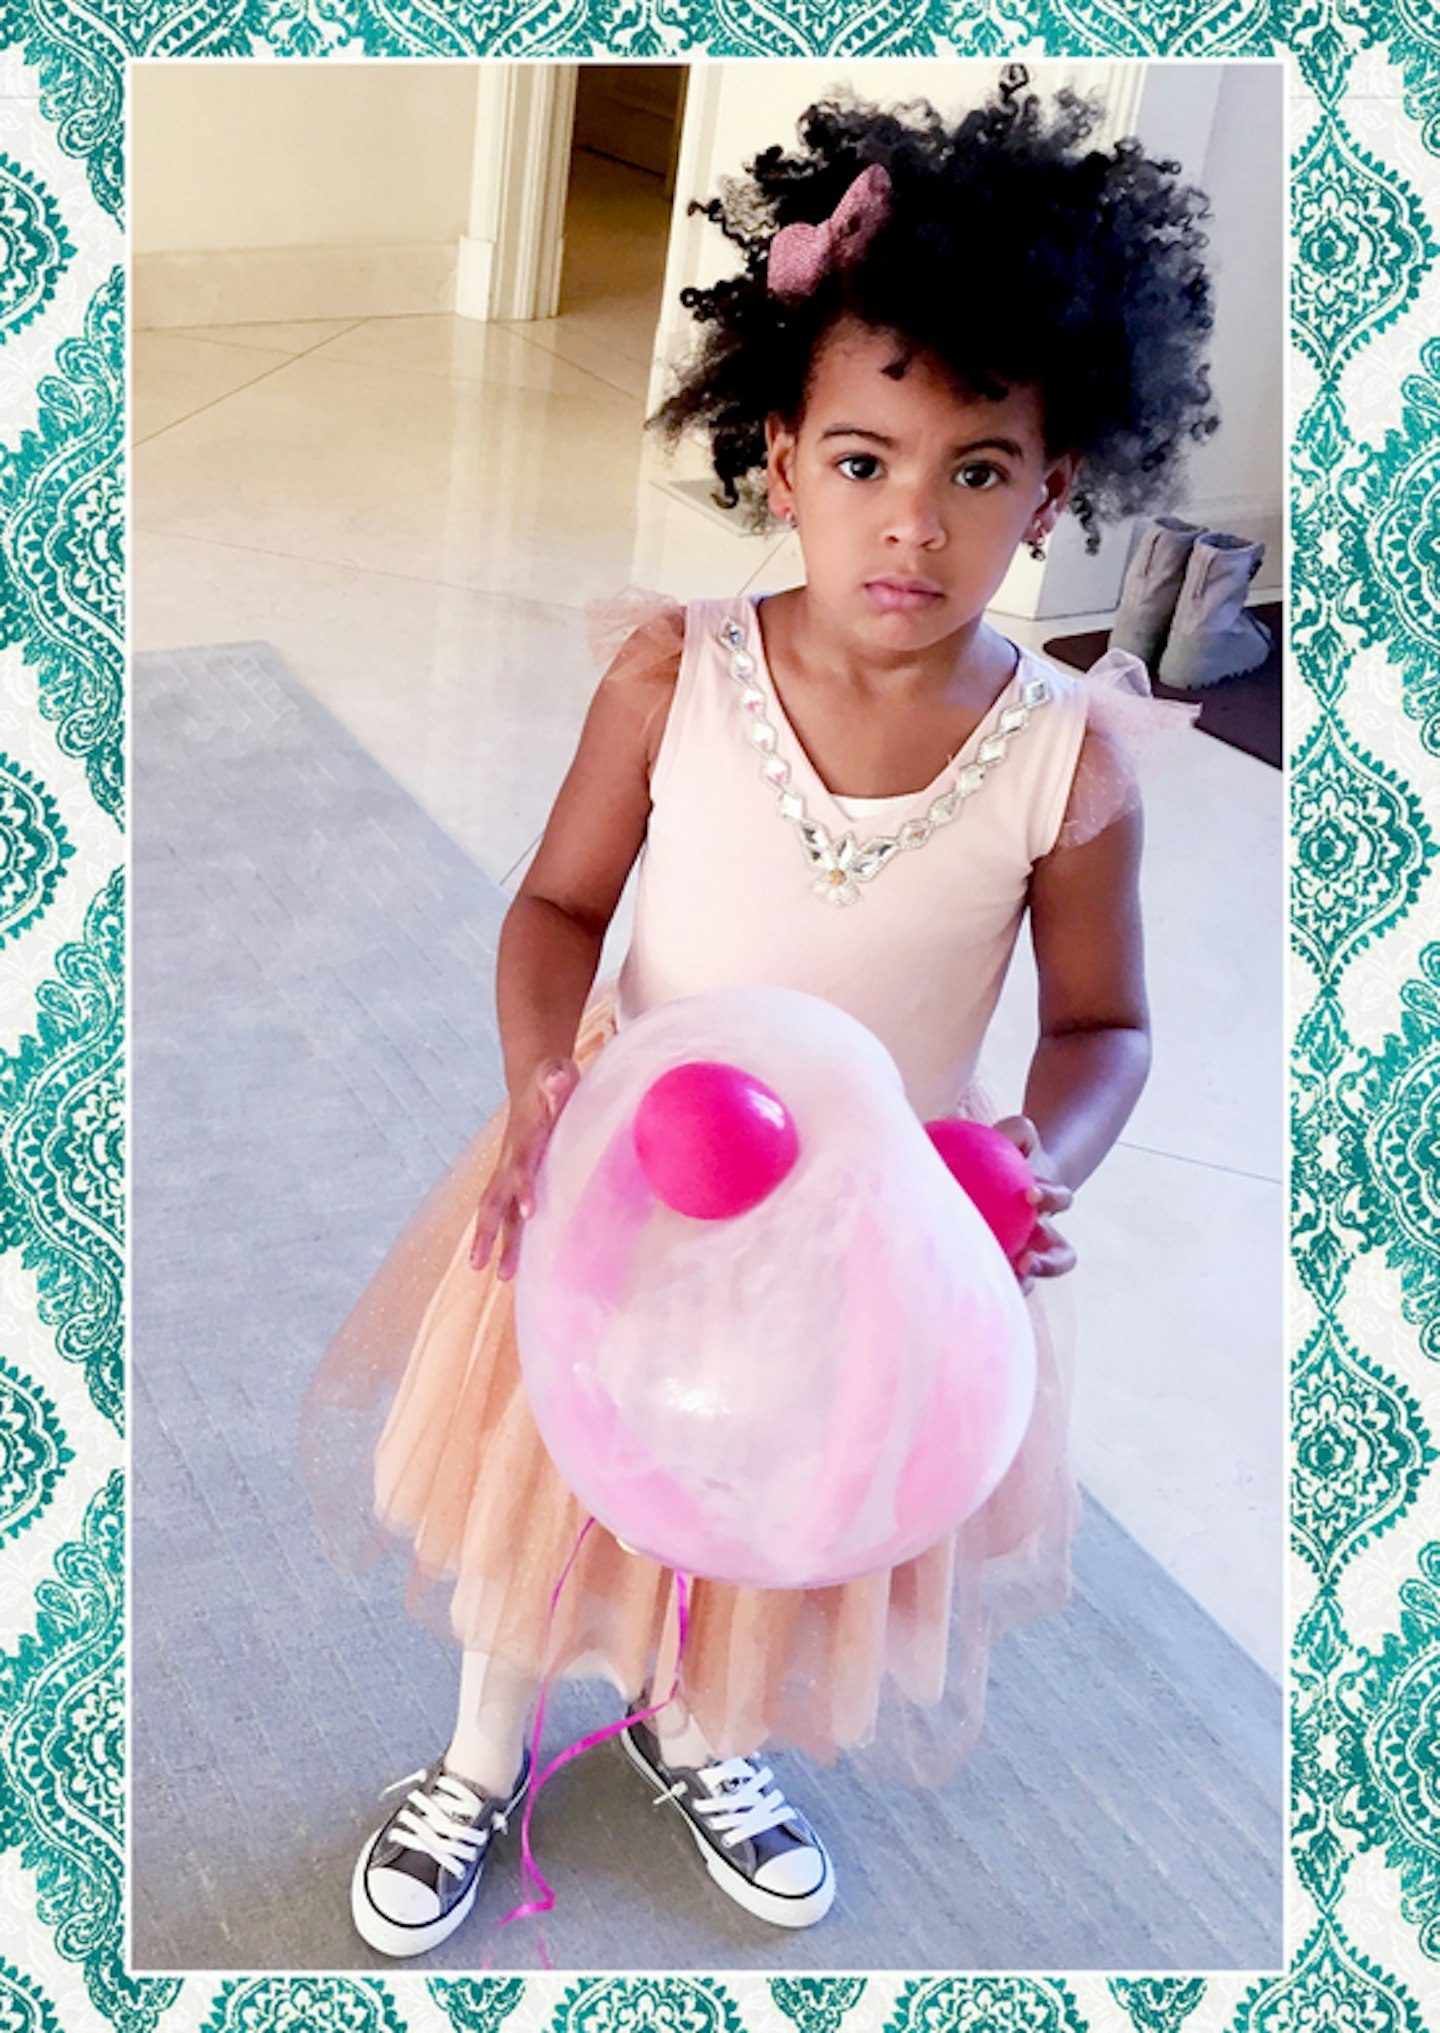 Blue Ivy Beyonce 4th birthday party